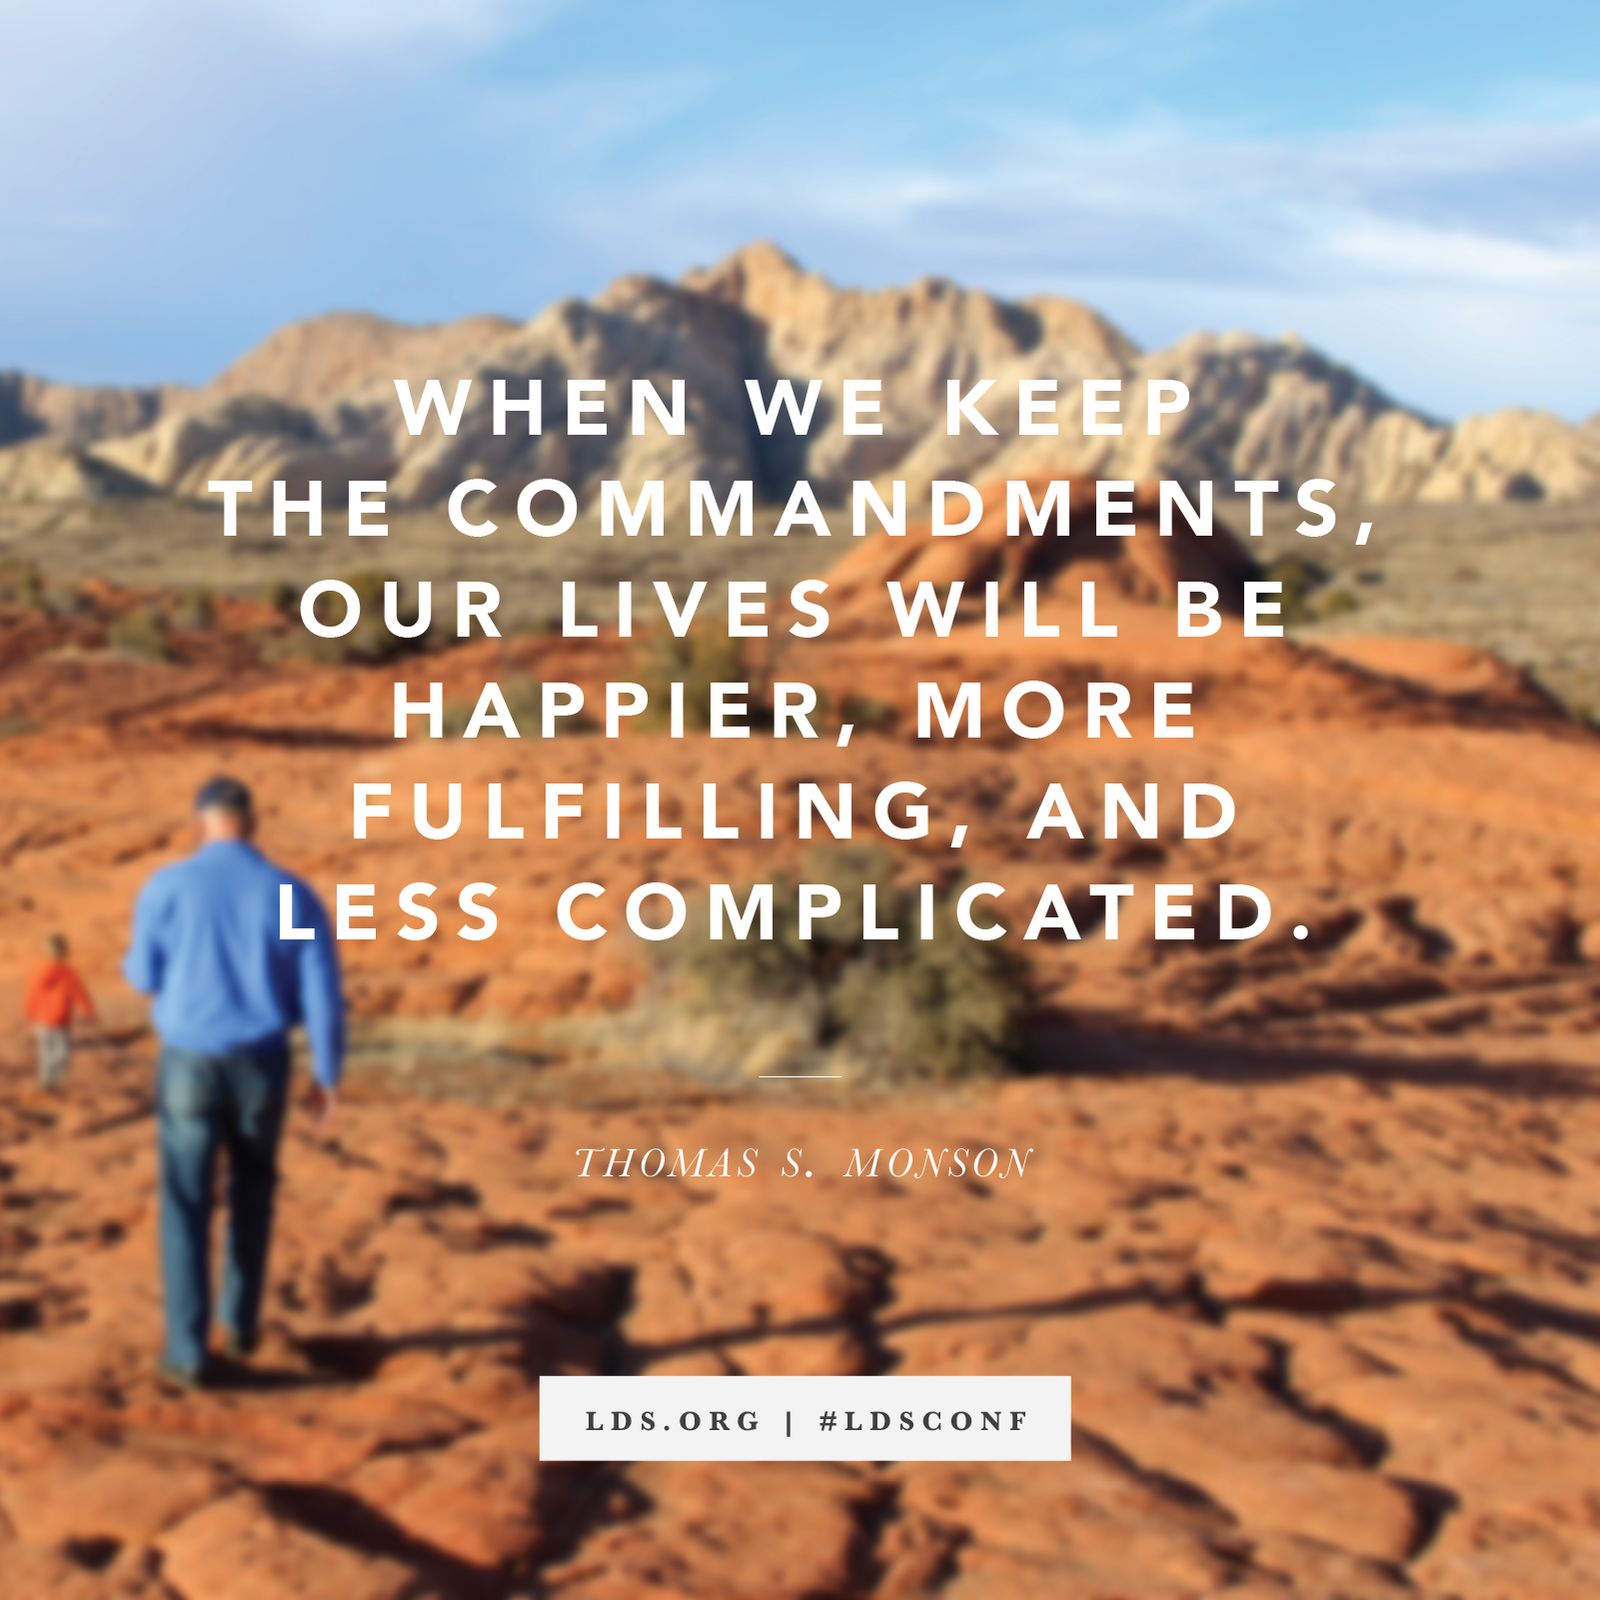 “When we keep the commandments, our lives will be happier, more fulfilling, and less complicated.” —President Thomas S. Monson, “Keep the Commandments” © See Individual Images ipCode 1.